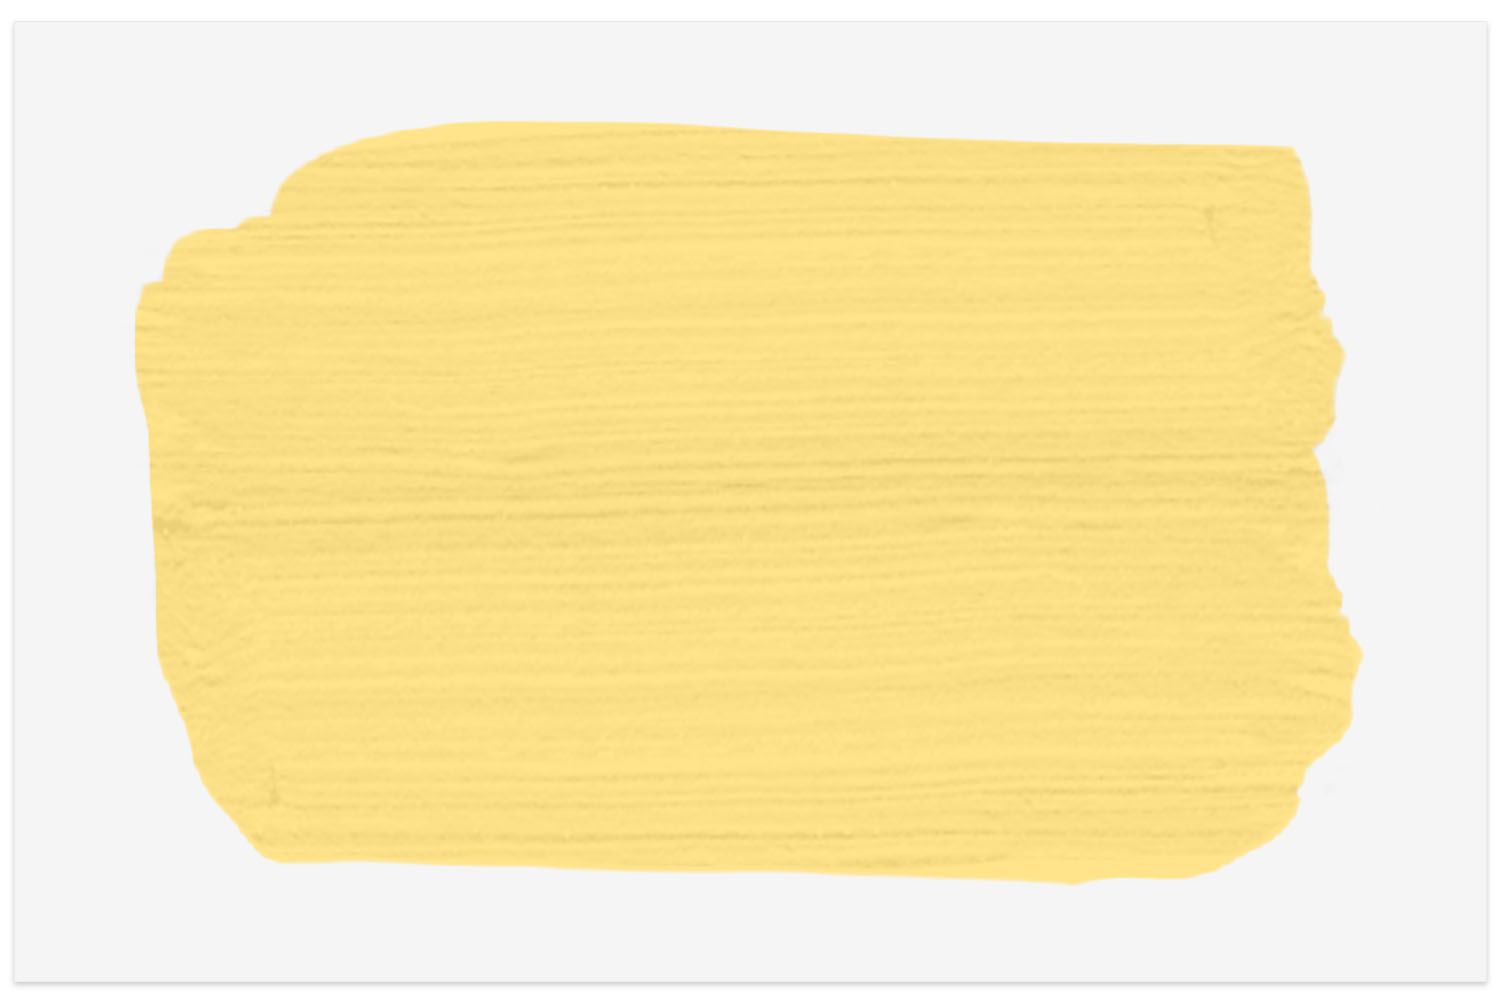 Behr Bicycle Yellow paint swatch